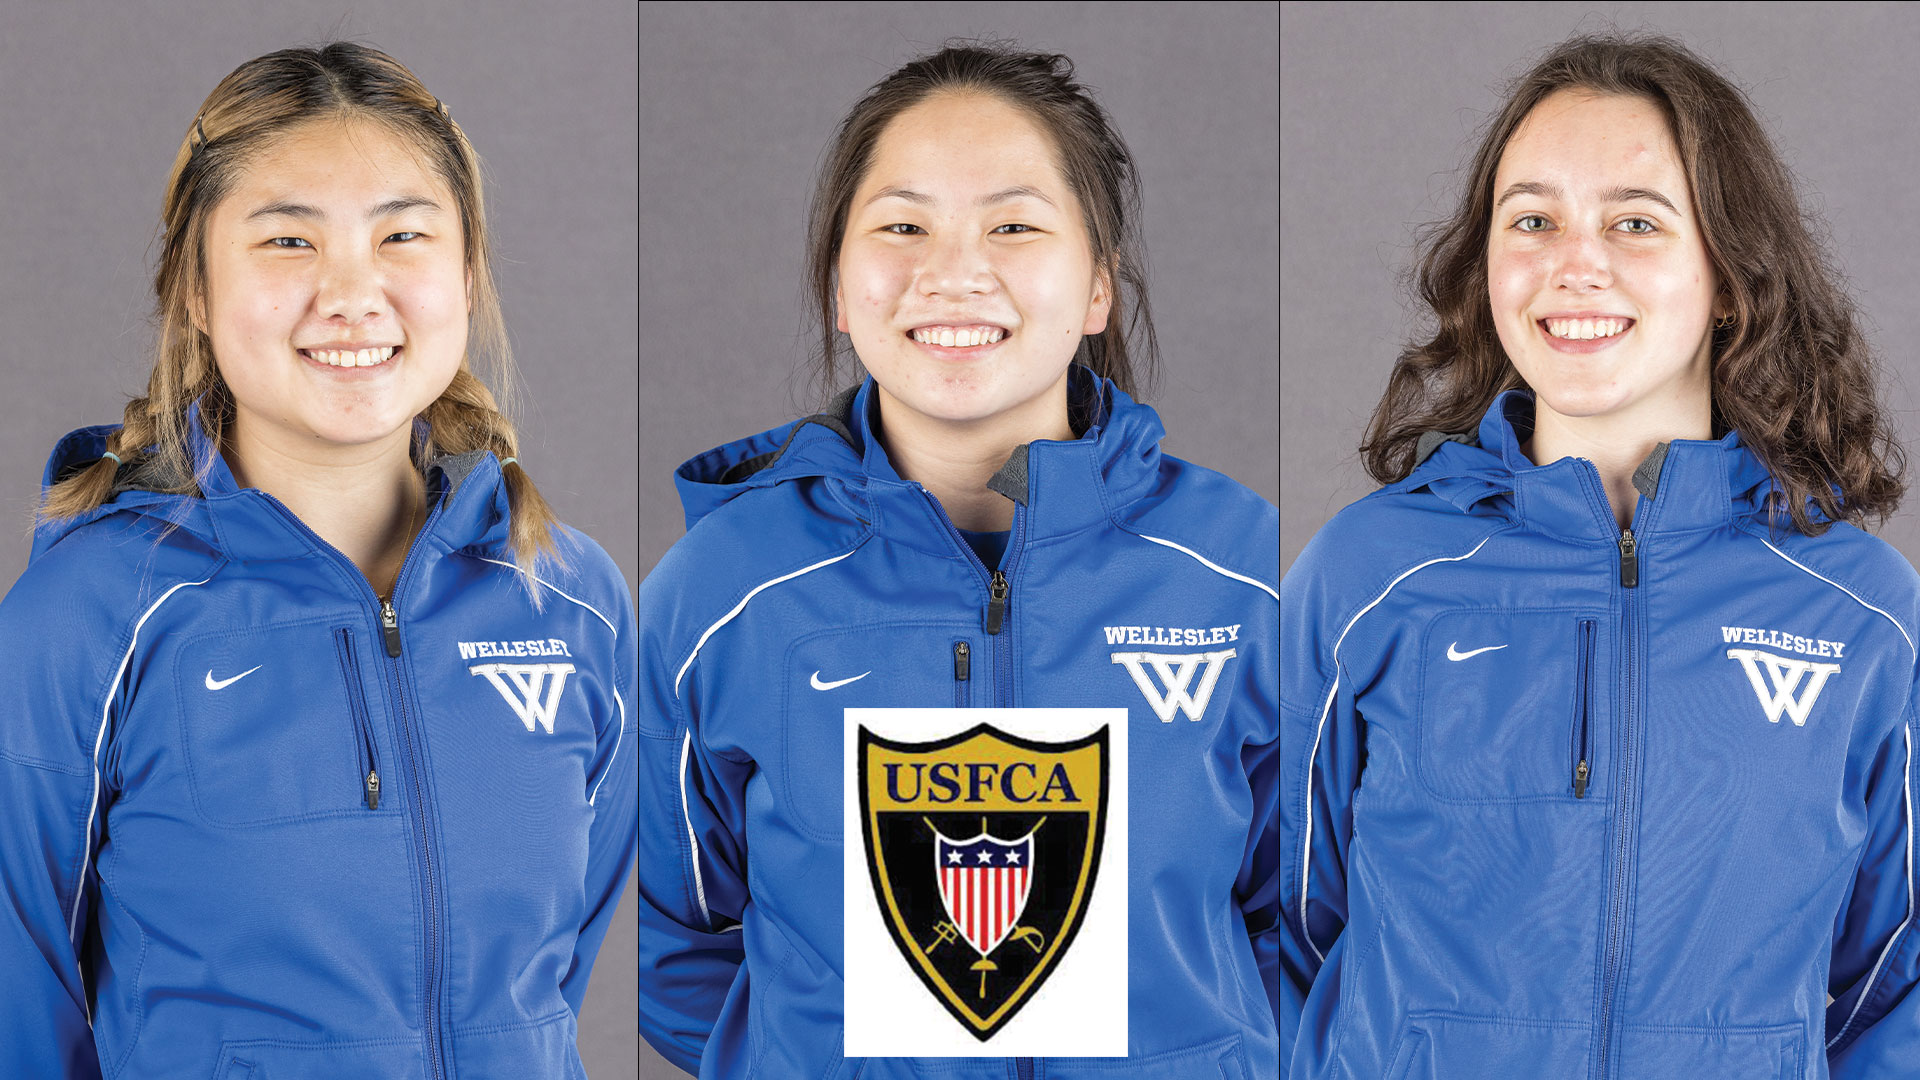 Kimura (left), Gilioli (middle), and Boodell (right) all earn All-America honors (Frank Poulin Photography)